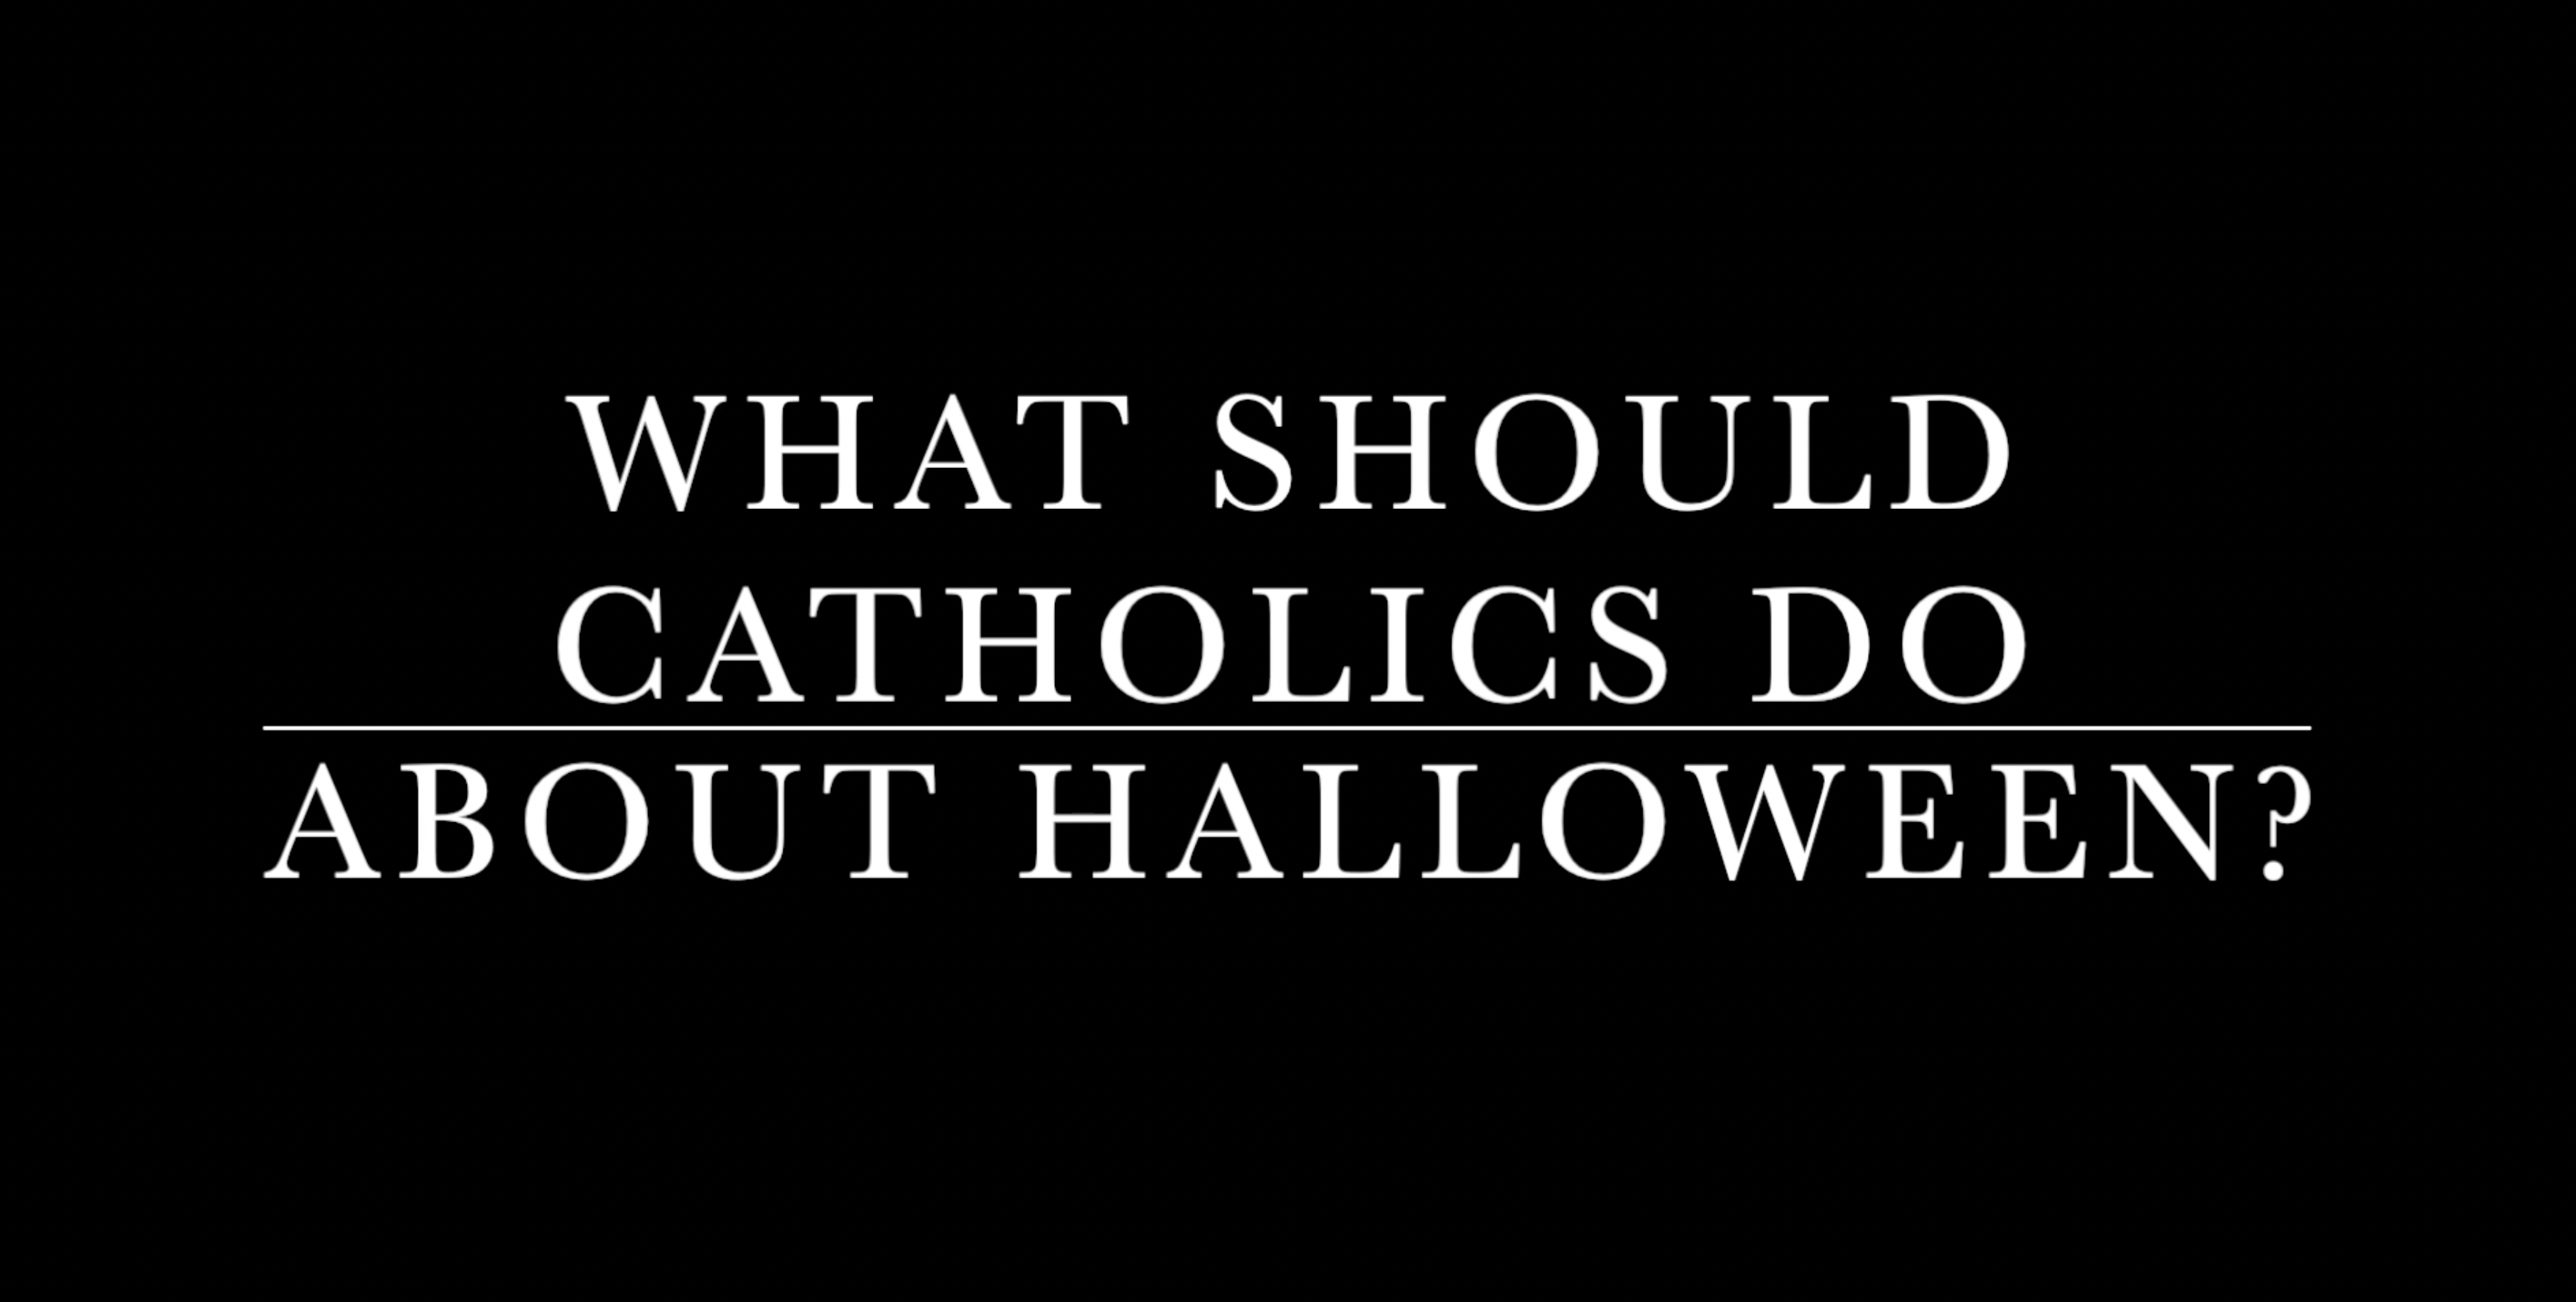 What Should Catholics Do about Halloween?